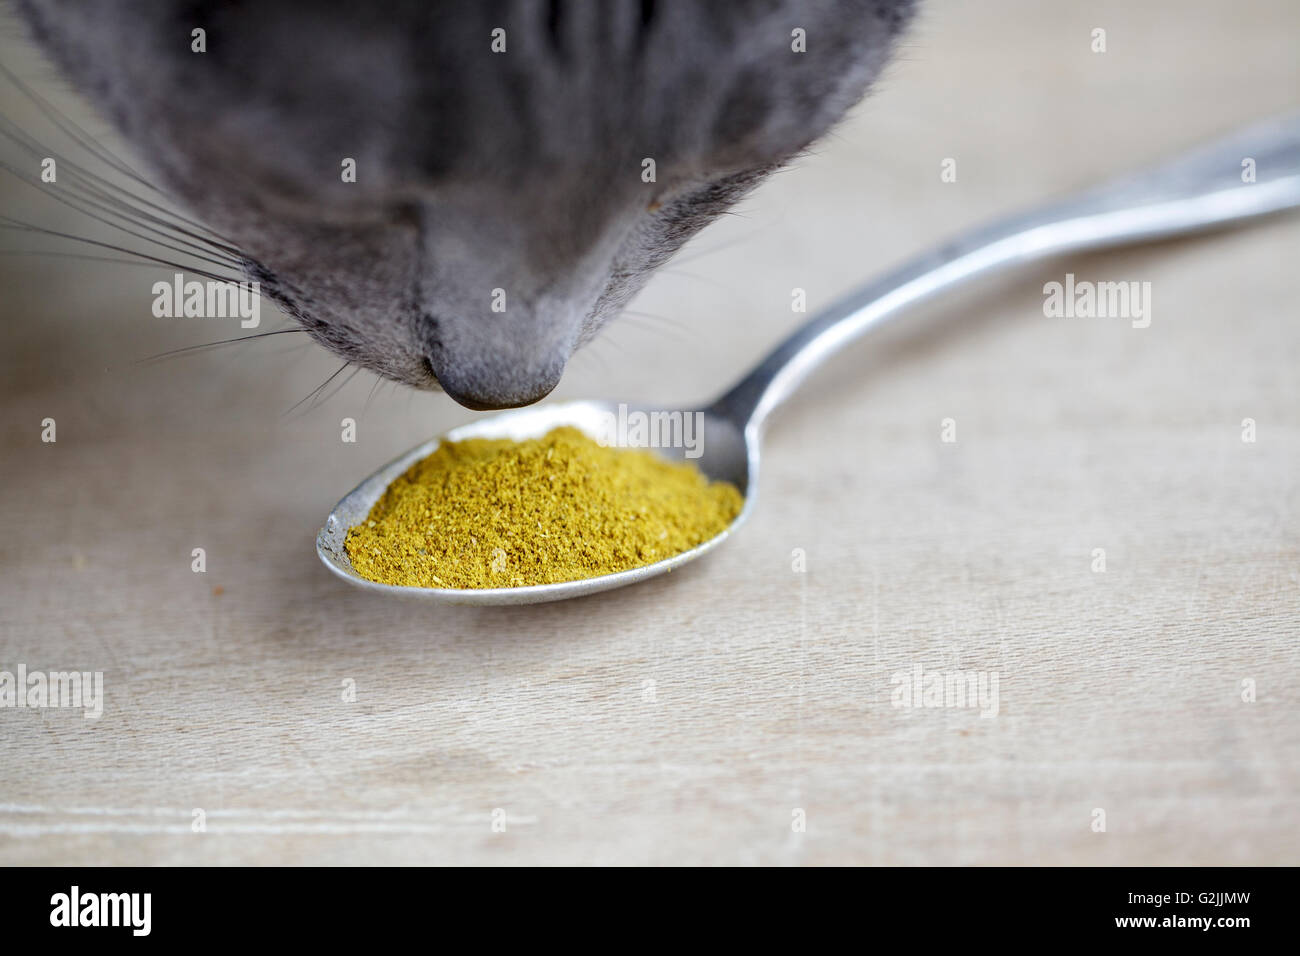 Cat sniffing a cucchiaio con giallo indian curry in polvere Foto Stock